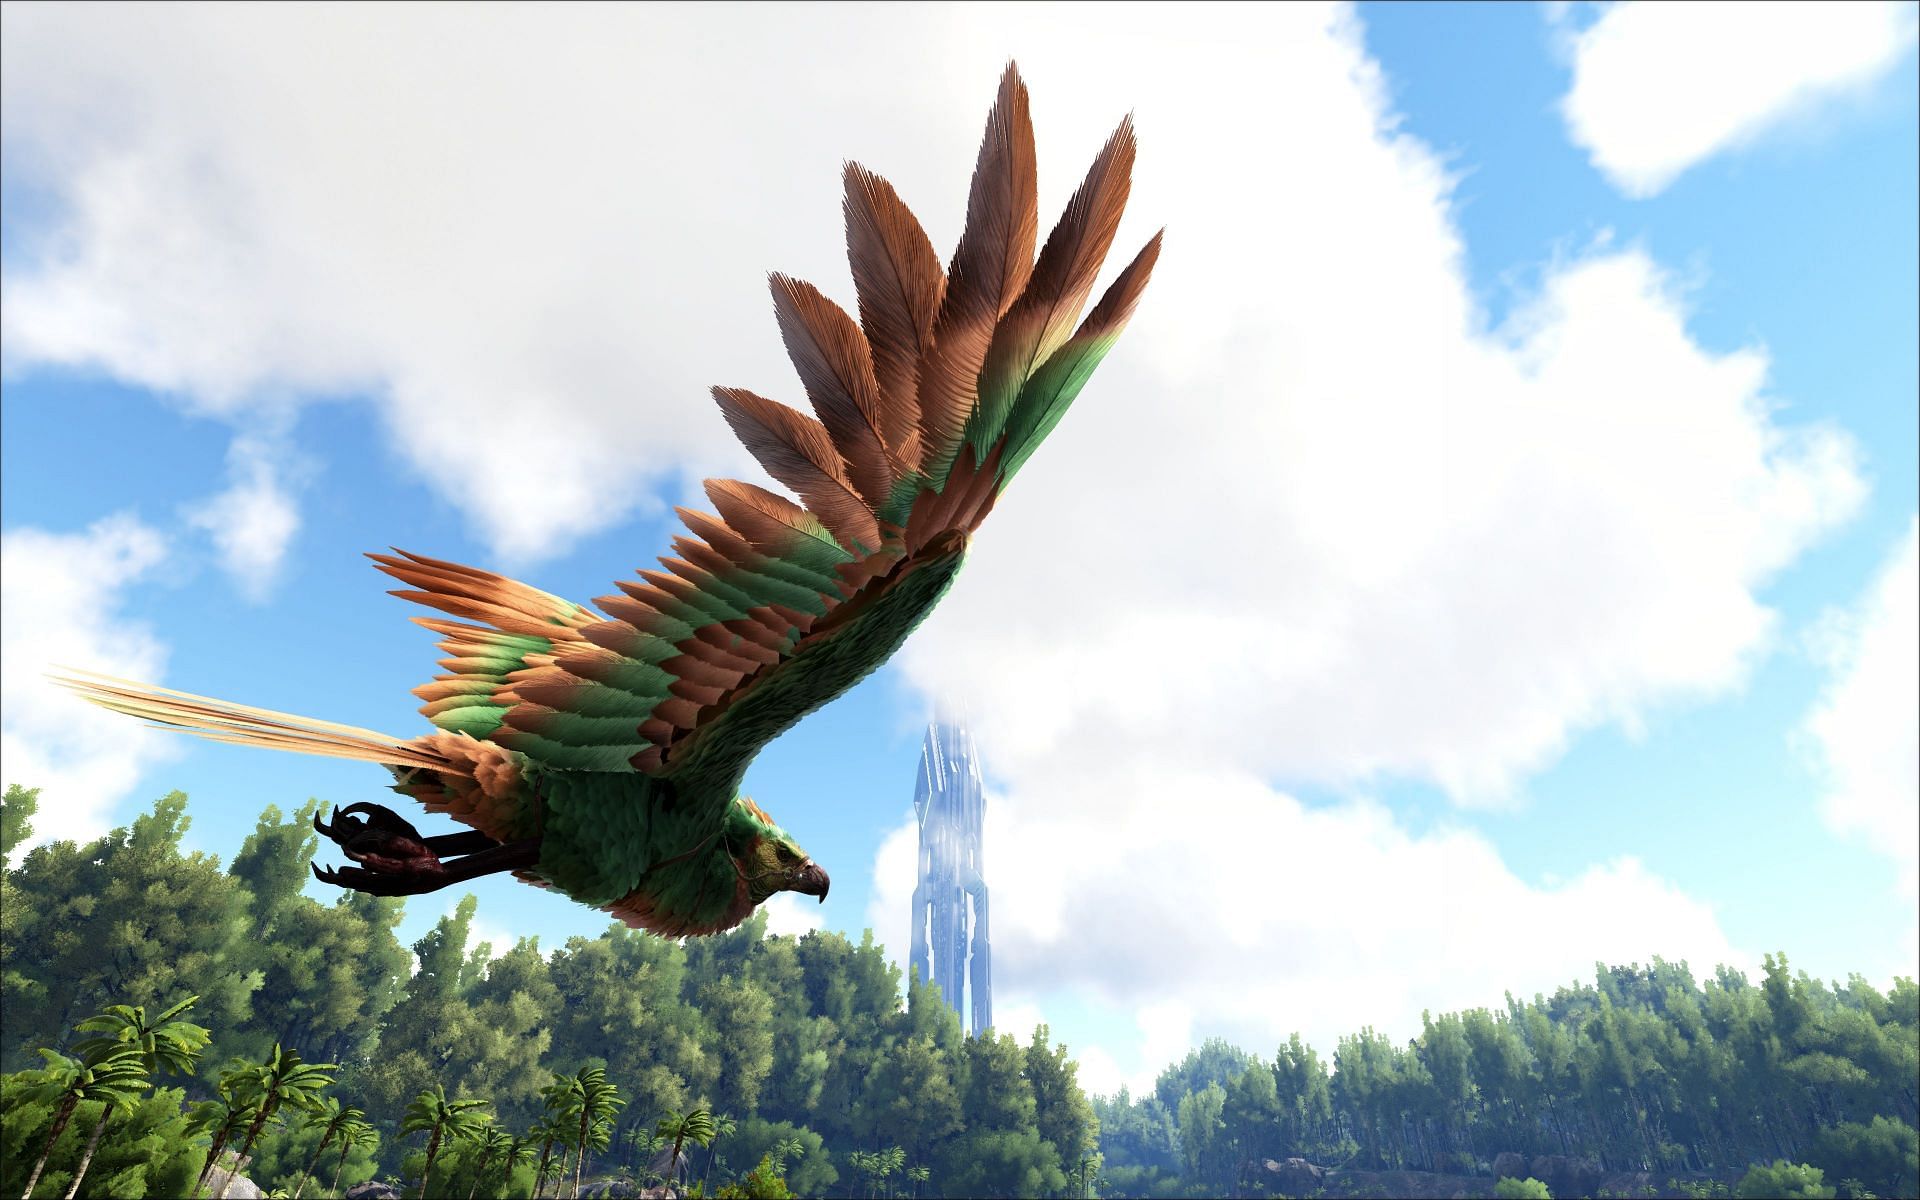 Argentavis can be found in the northern mountains of the Ark Survival Ascended worldmass (Image via Studio Wildcard)